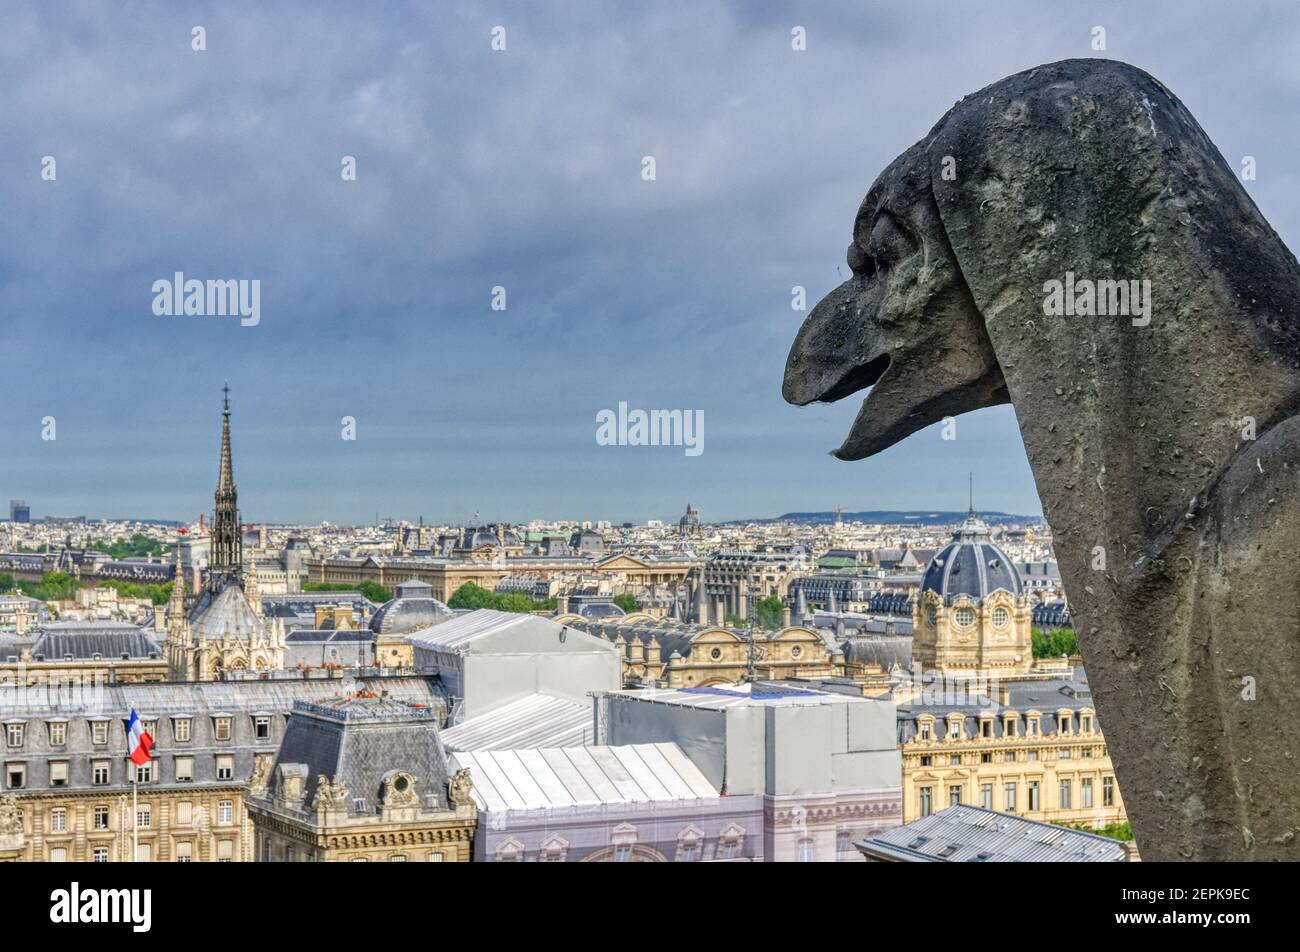 The view across Paris from the tower of Notre Dame de Paris with the gargoyles Stock Photo